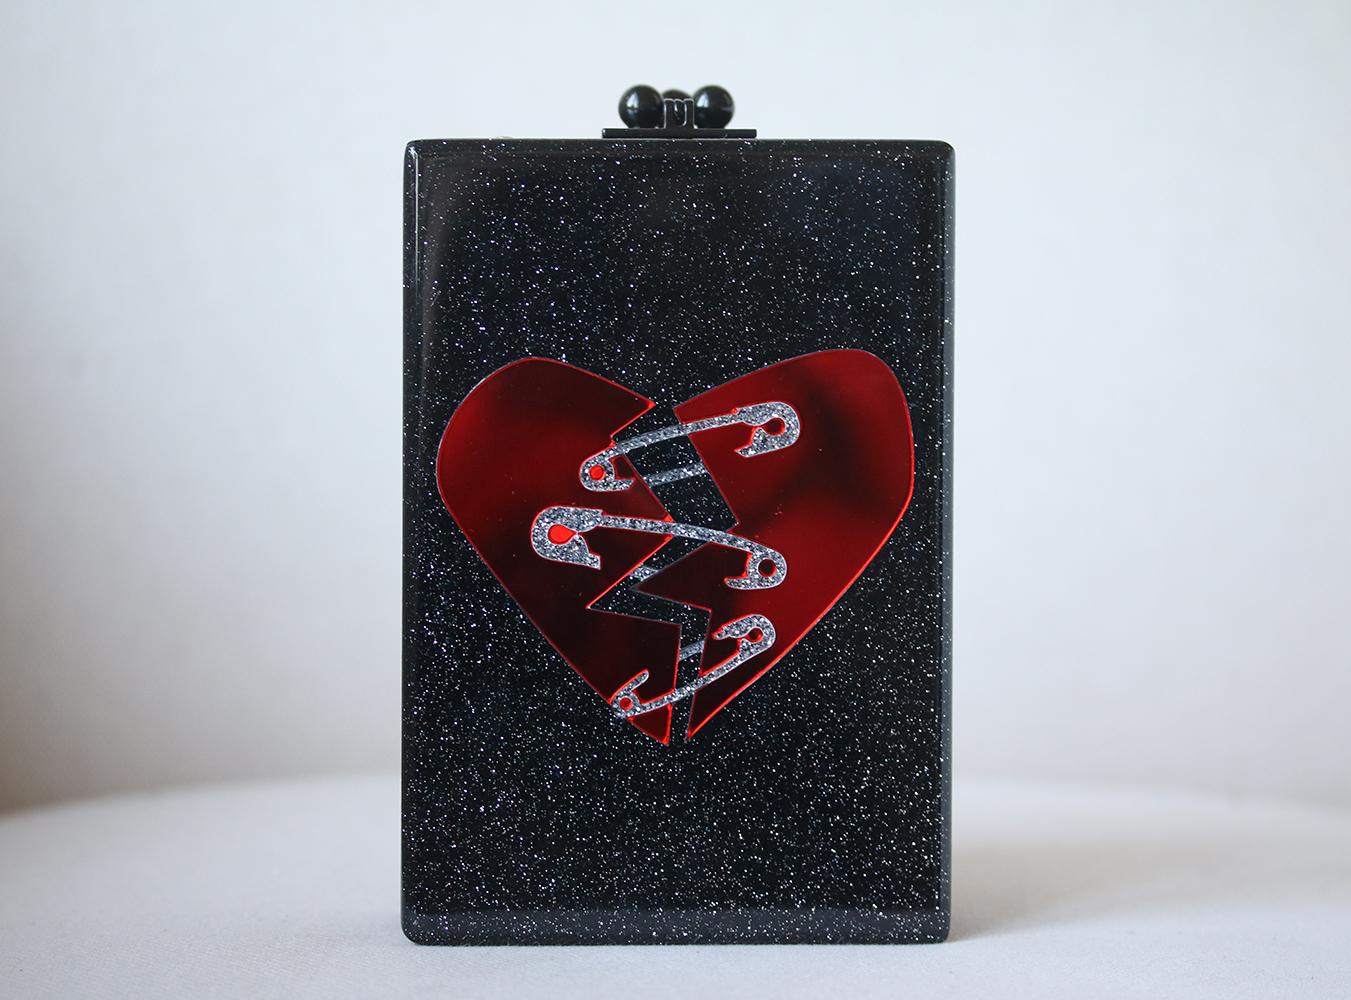 This Edie Parker Carol clutch is rendered in hand poured acrylic and features a red broken heart design and a drop in chain shoulder strap. Interior mirror with etched logo. Hand poured acrylic. Colour: Glitter black. Kiss lock closure.

Dimensions: